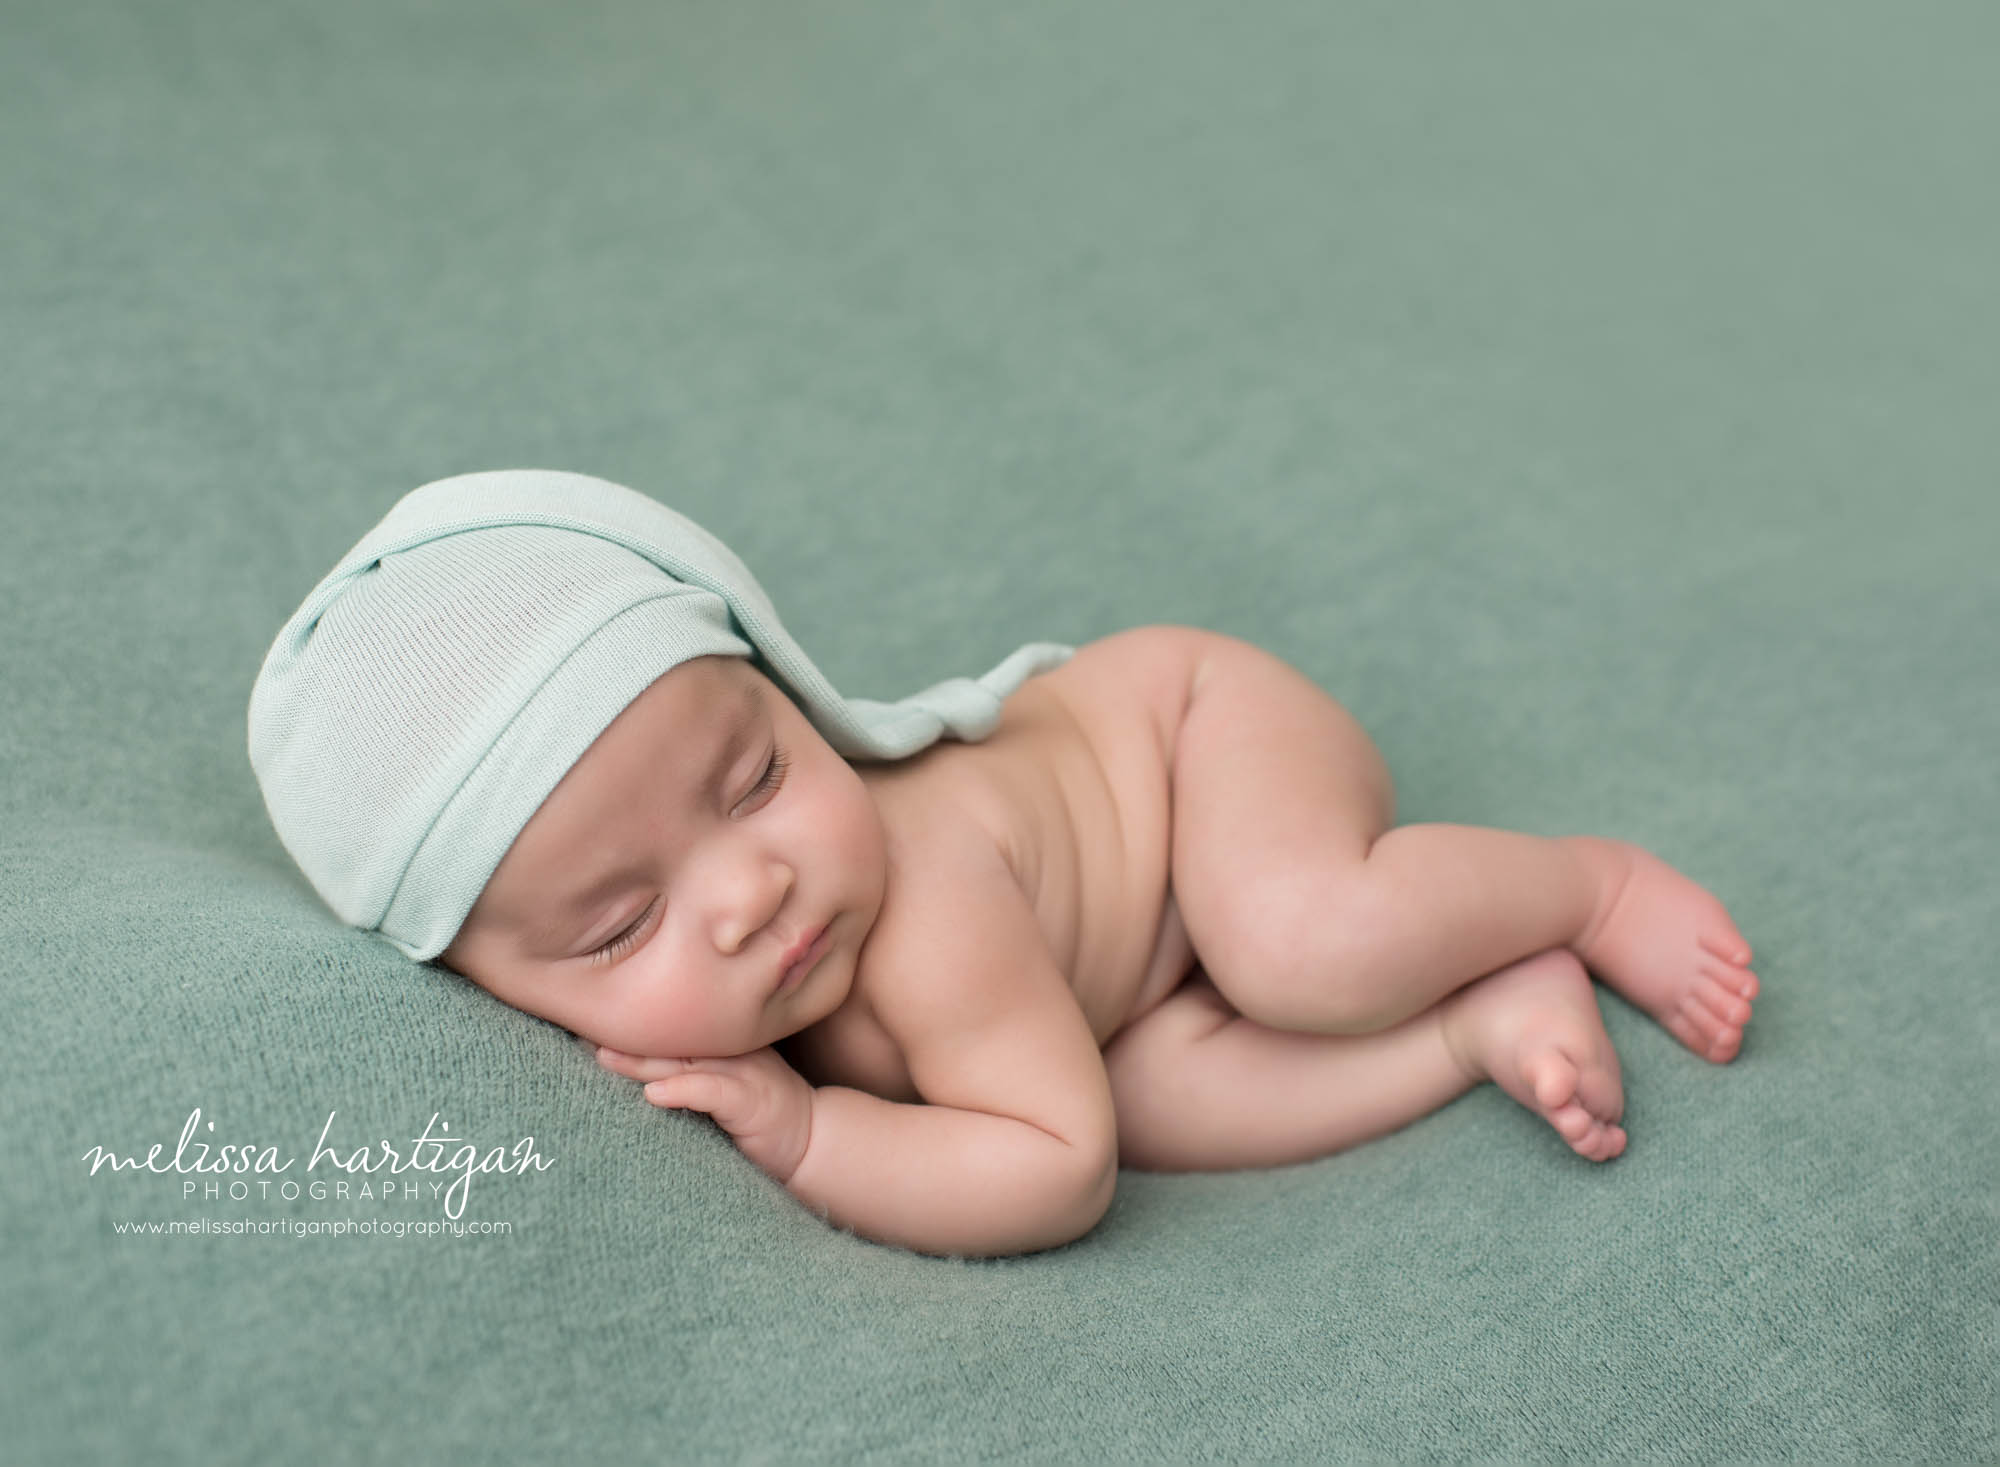 newborn baby girl posed on side teal green backdrop with light teal green sleepy cap Windsor newborn Photography Connecticut